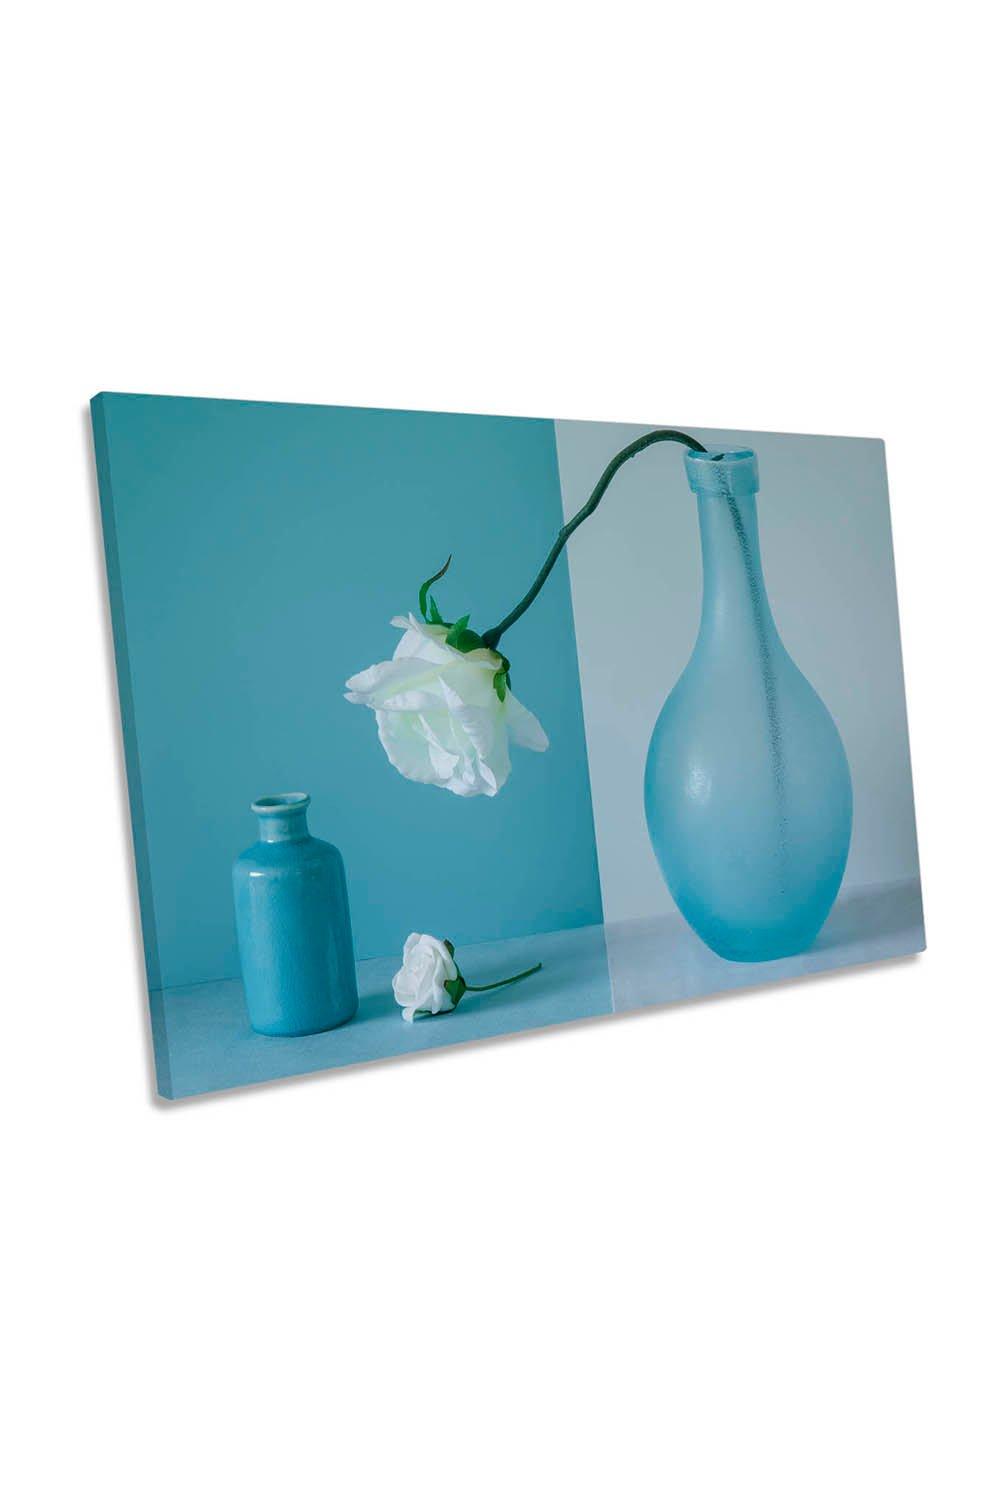 Out of the Vase Flower Blue Canvas Wall Art Picture Print